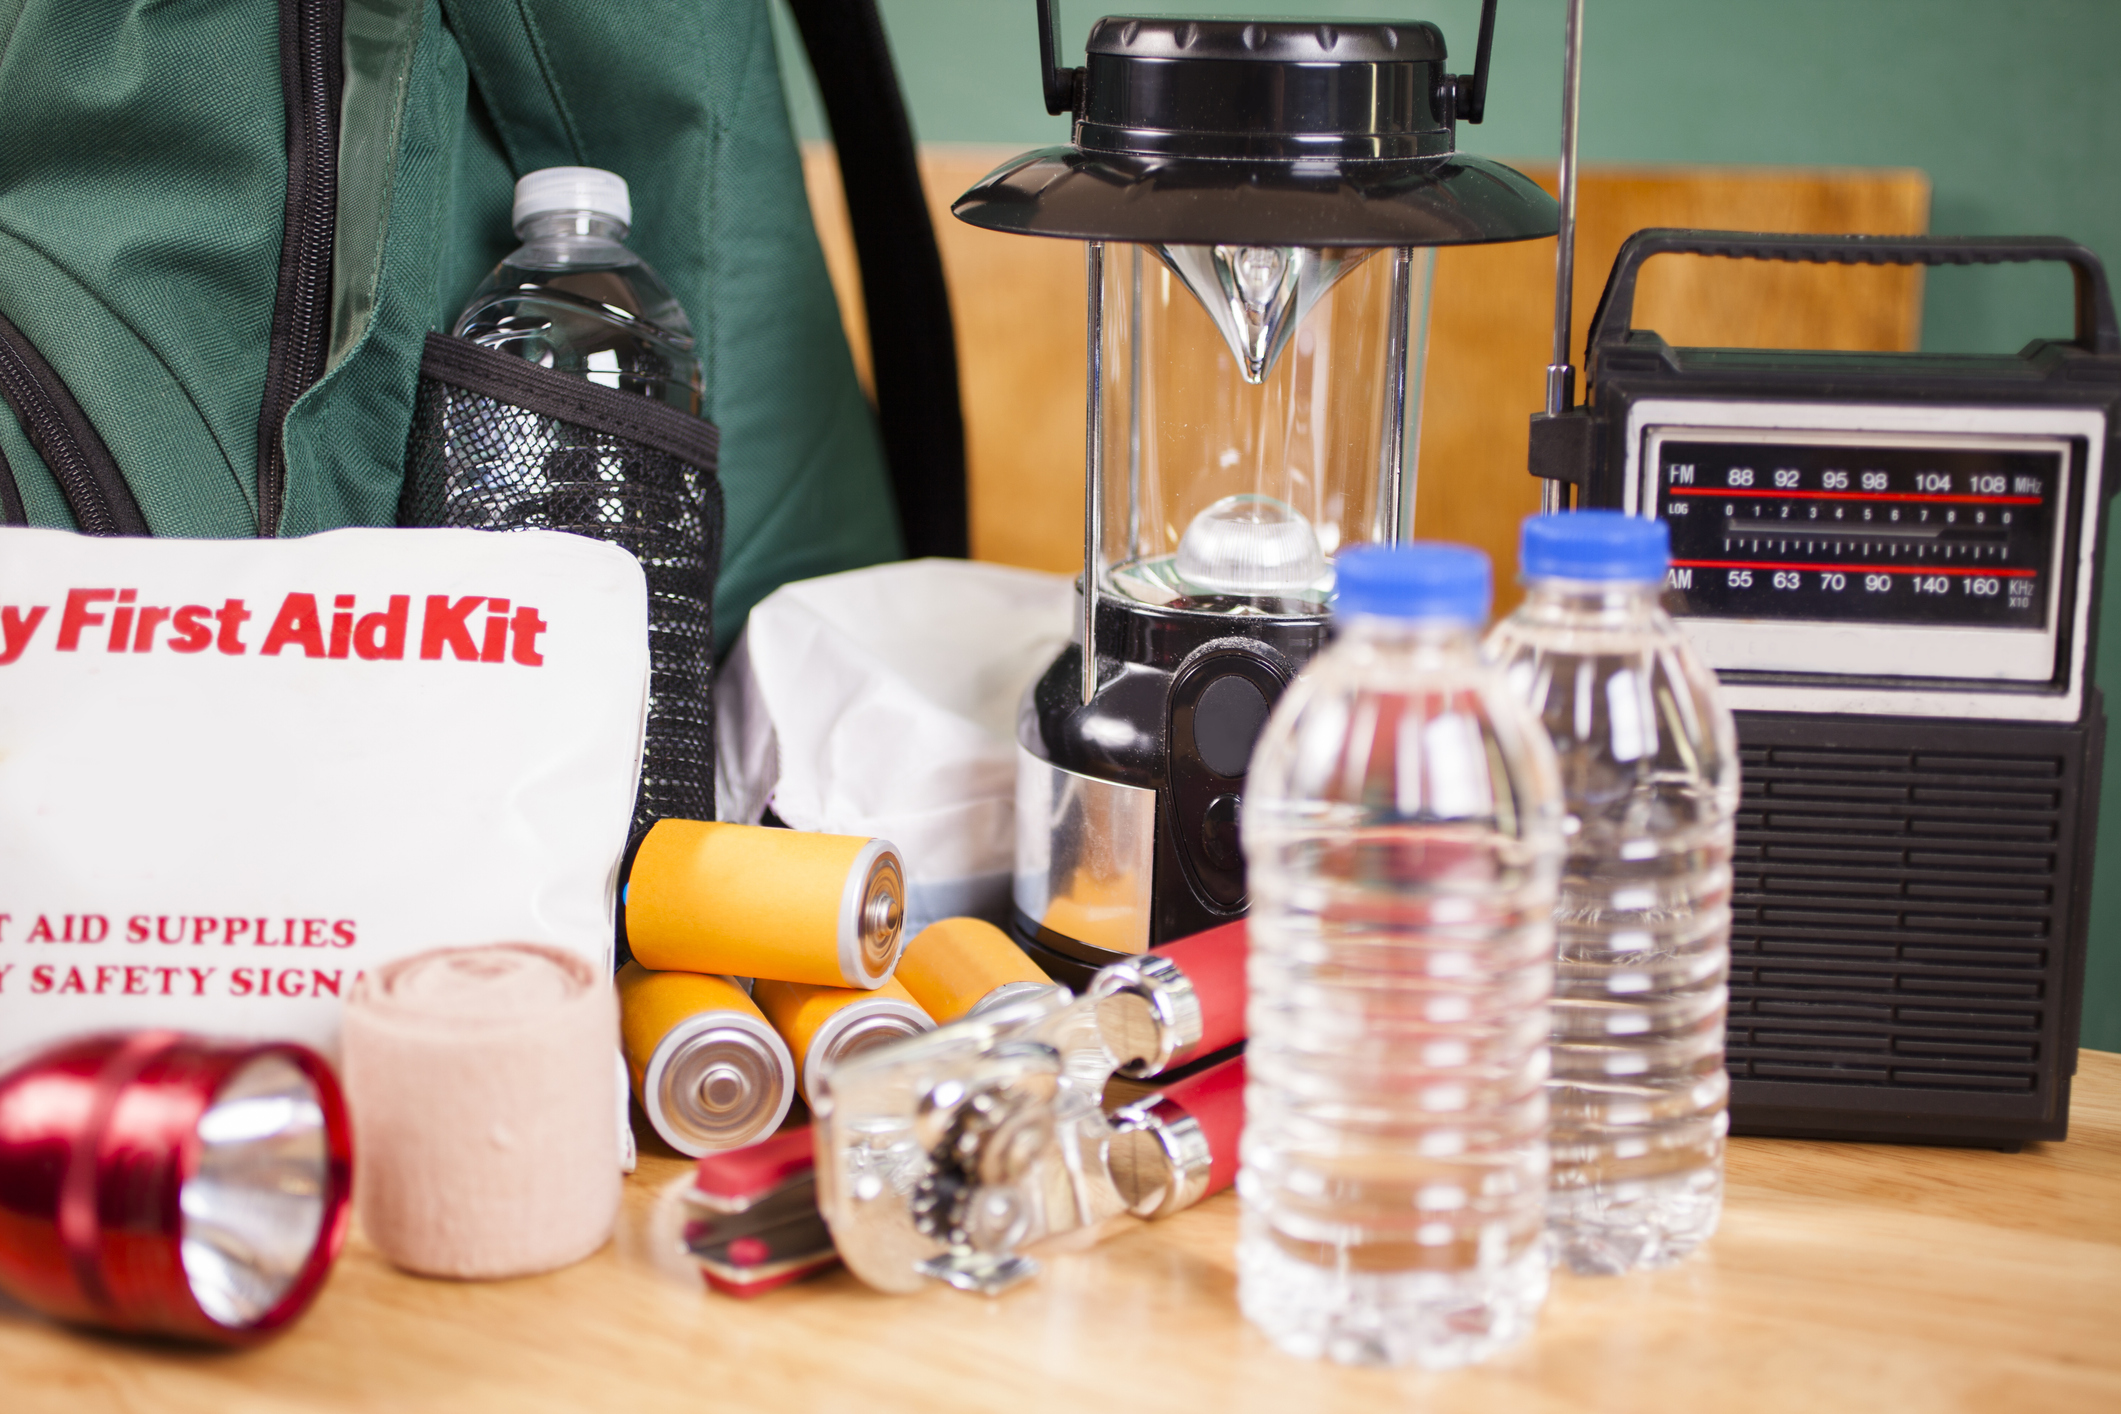 image of emergency supplies including first aid kit, batteries, water bottles, radio, lantern, and backpack